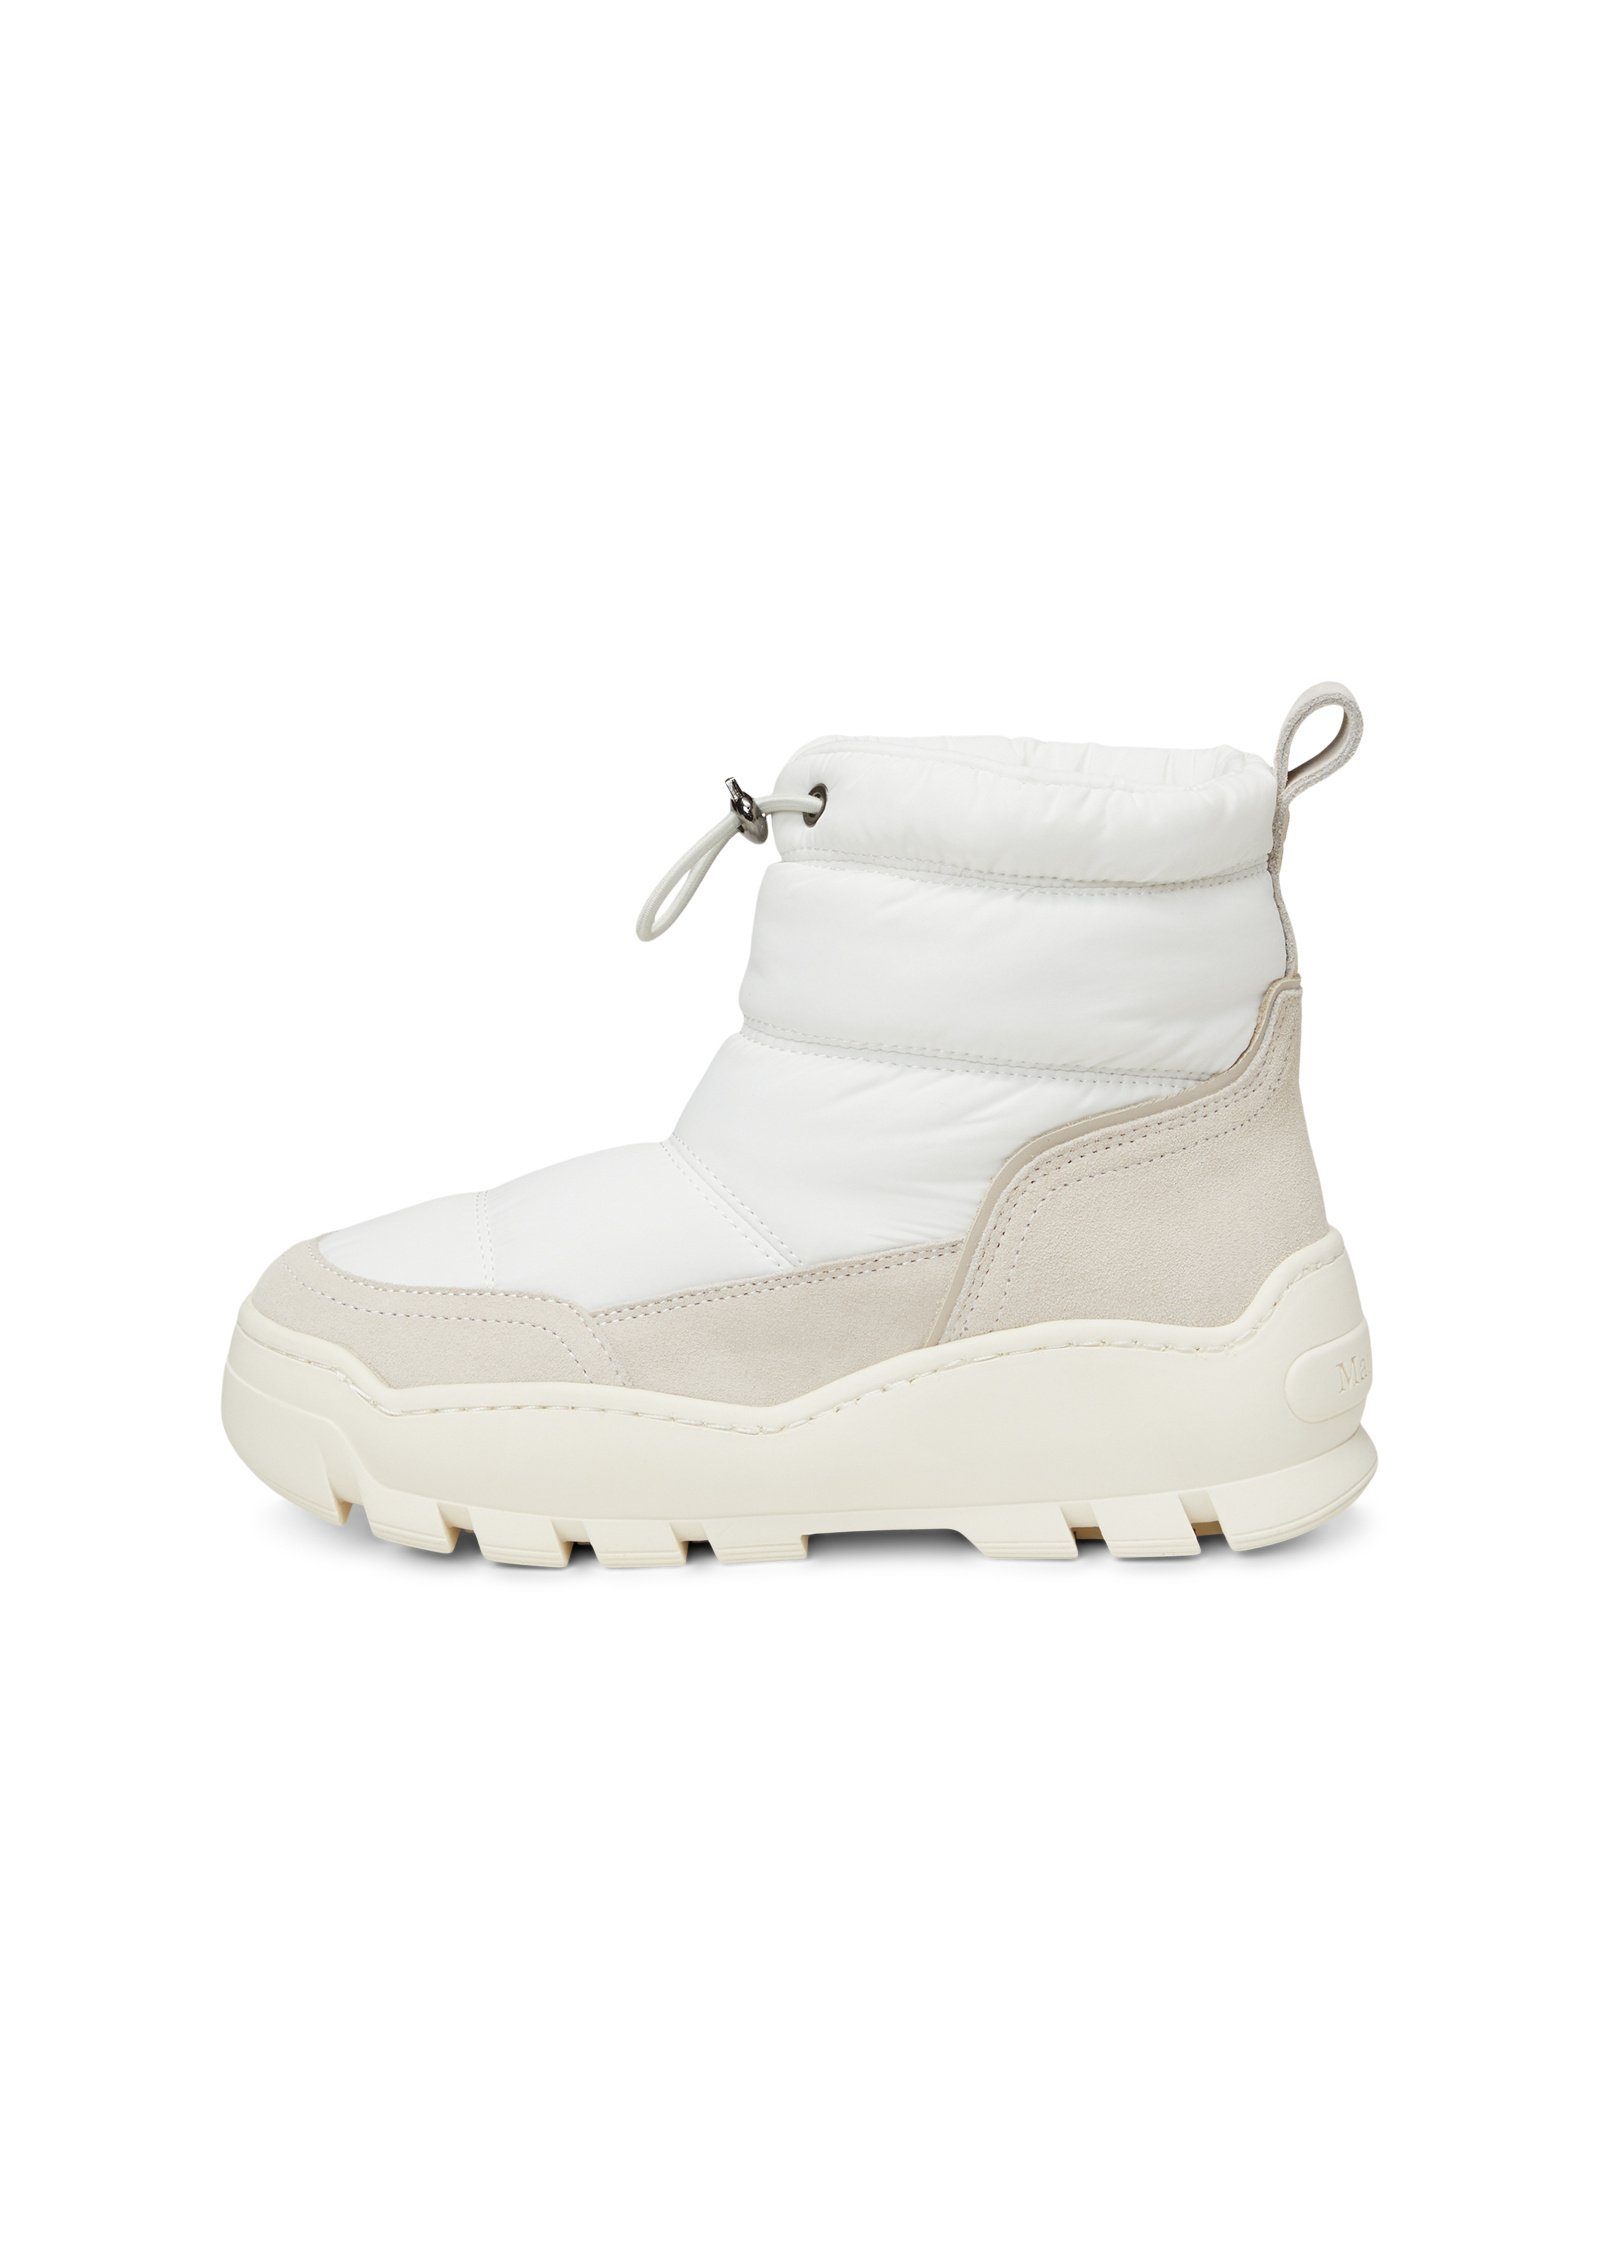 Marc O'Polo aus recyceltem Polyester weiß Winterboots